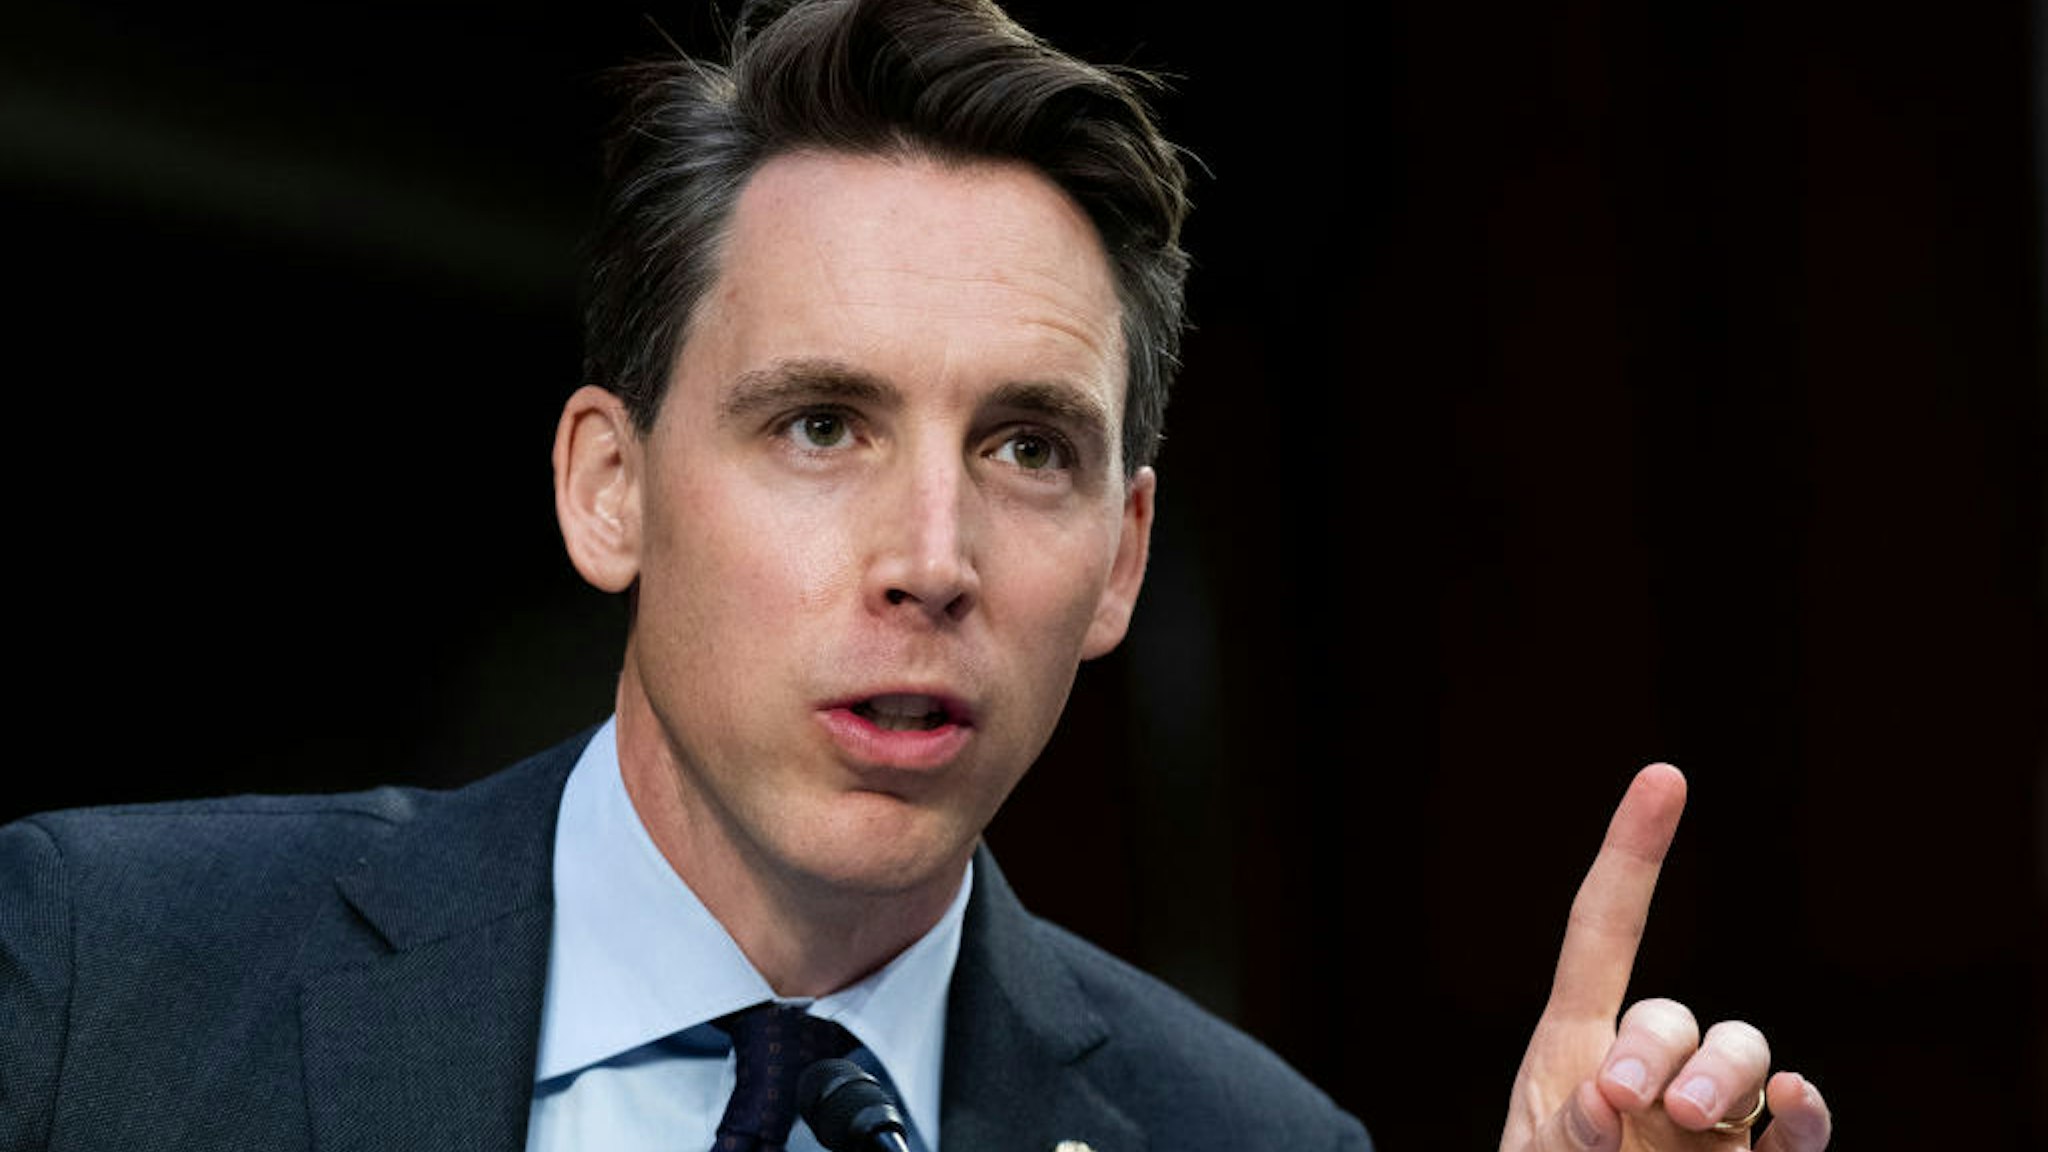 UNITED STATES - SEPTEMBER 29: Sen. Josh Hawley, R-Mo., speaks during the Senate Judiciary Committee hearing titled “Texas’s Unconstitutional Abortion Ban and the Role of the Shadow Docket,” in Hart Senate Office Building in Washington, D.C., on Wednesday, September 29, 2021. (Photo By Tom Williams/CQ Roll Call/POOL)